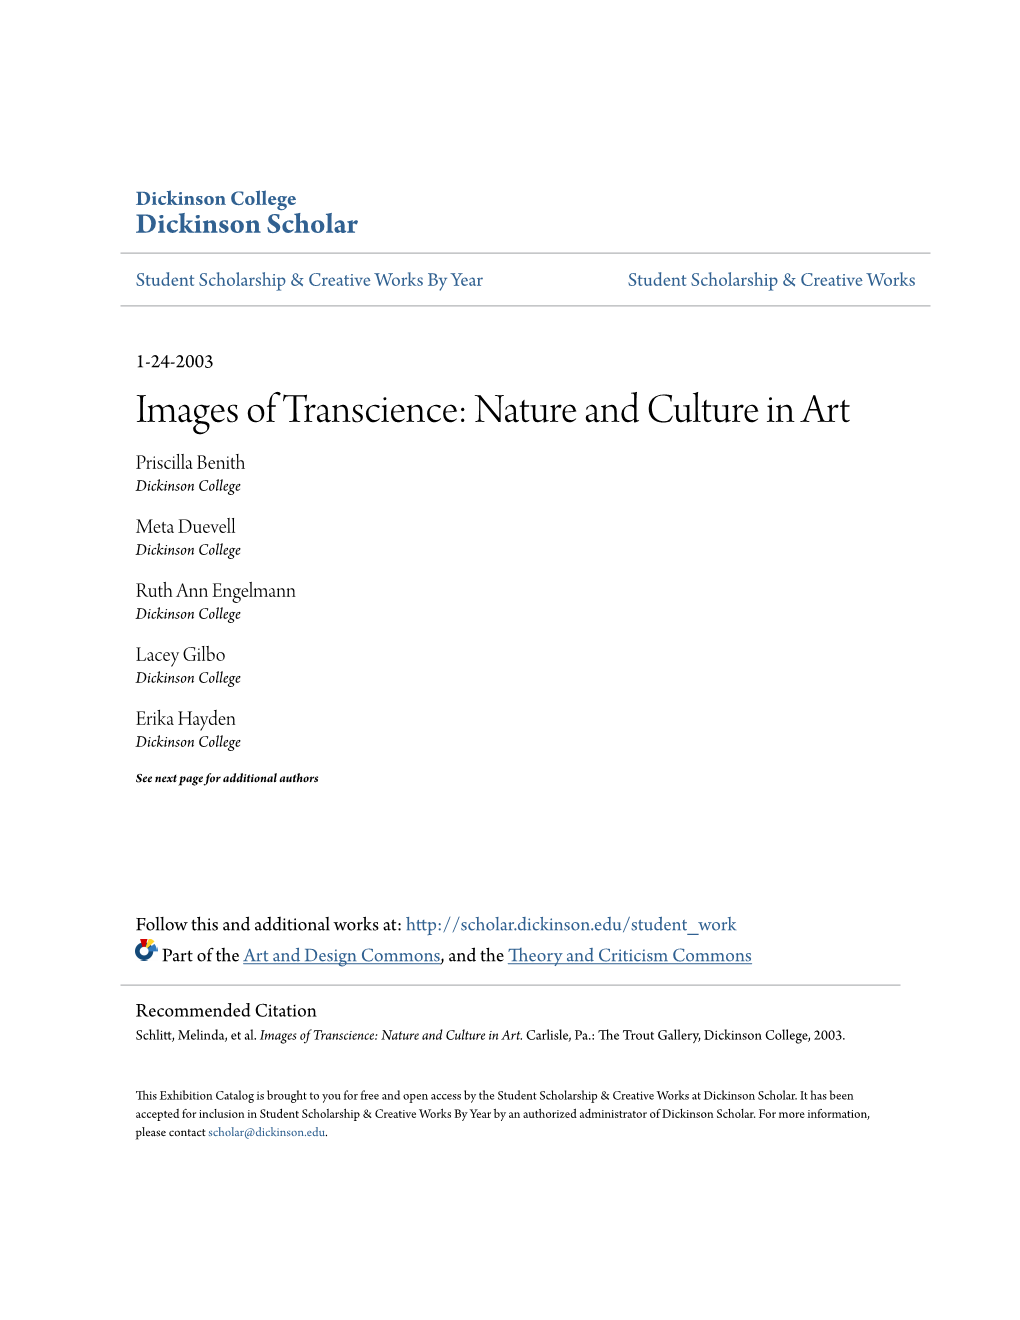 Images of Transcience: Nature and Culture in Art Priscilla Benith Dickinson College